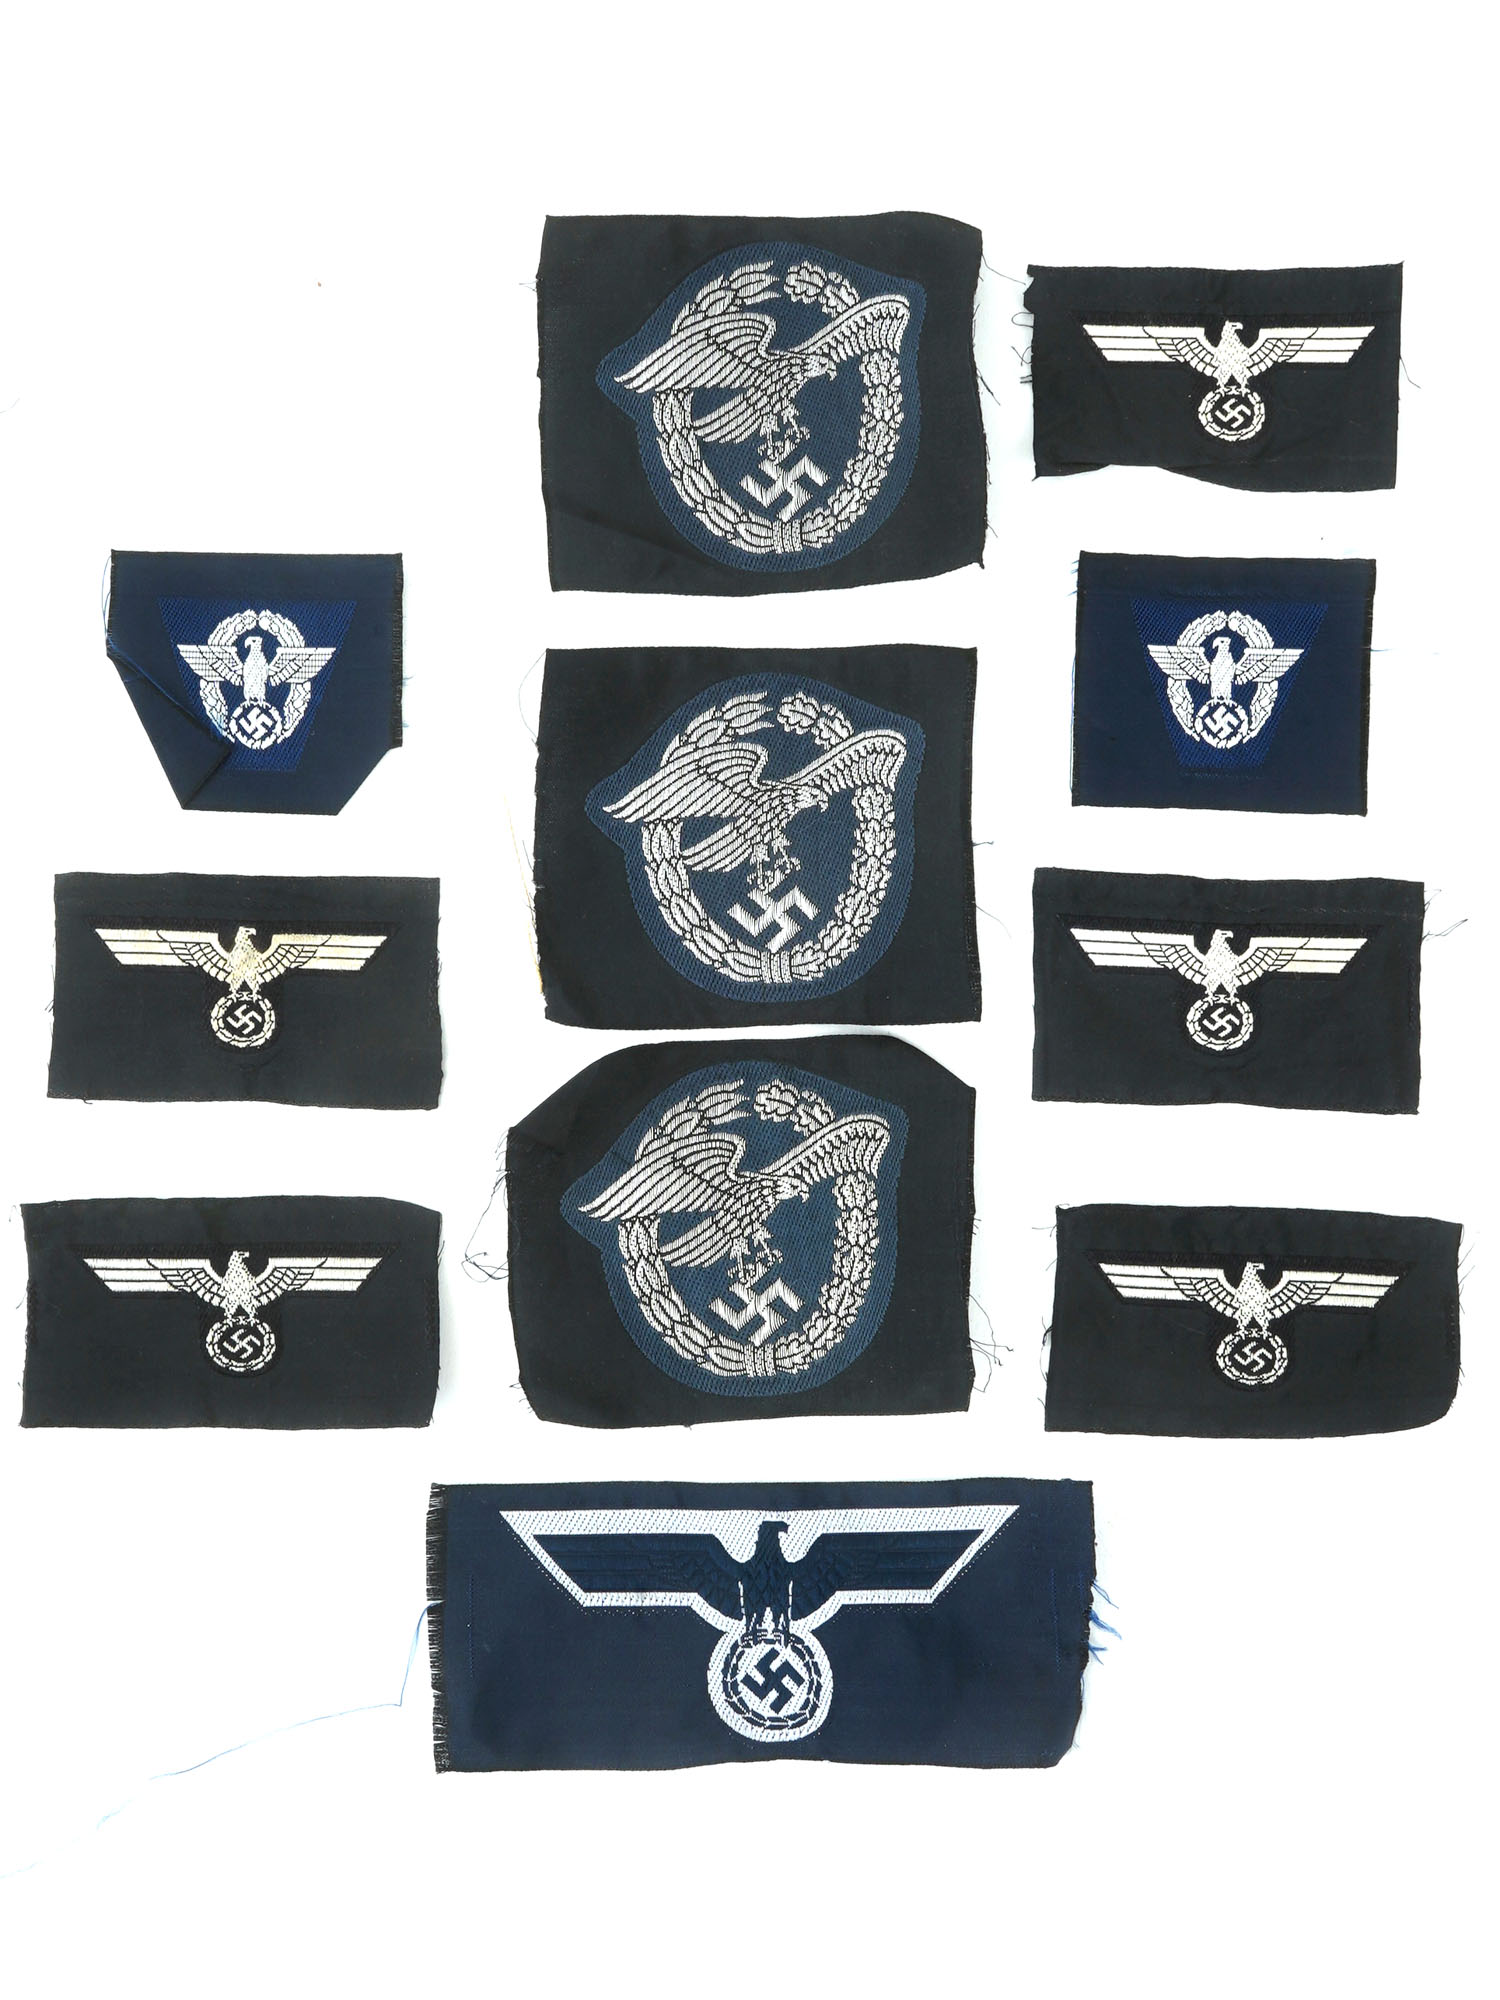 WWII NAZI GERMAN FABRIC EAGLE PATCHES 11 ITEMS PIC-0